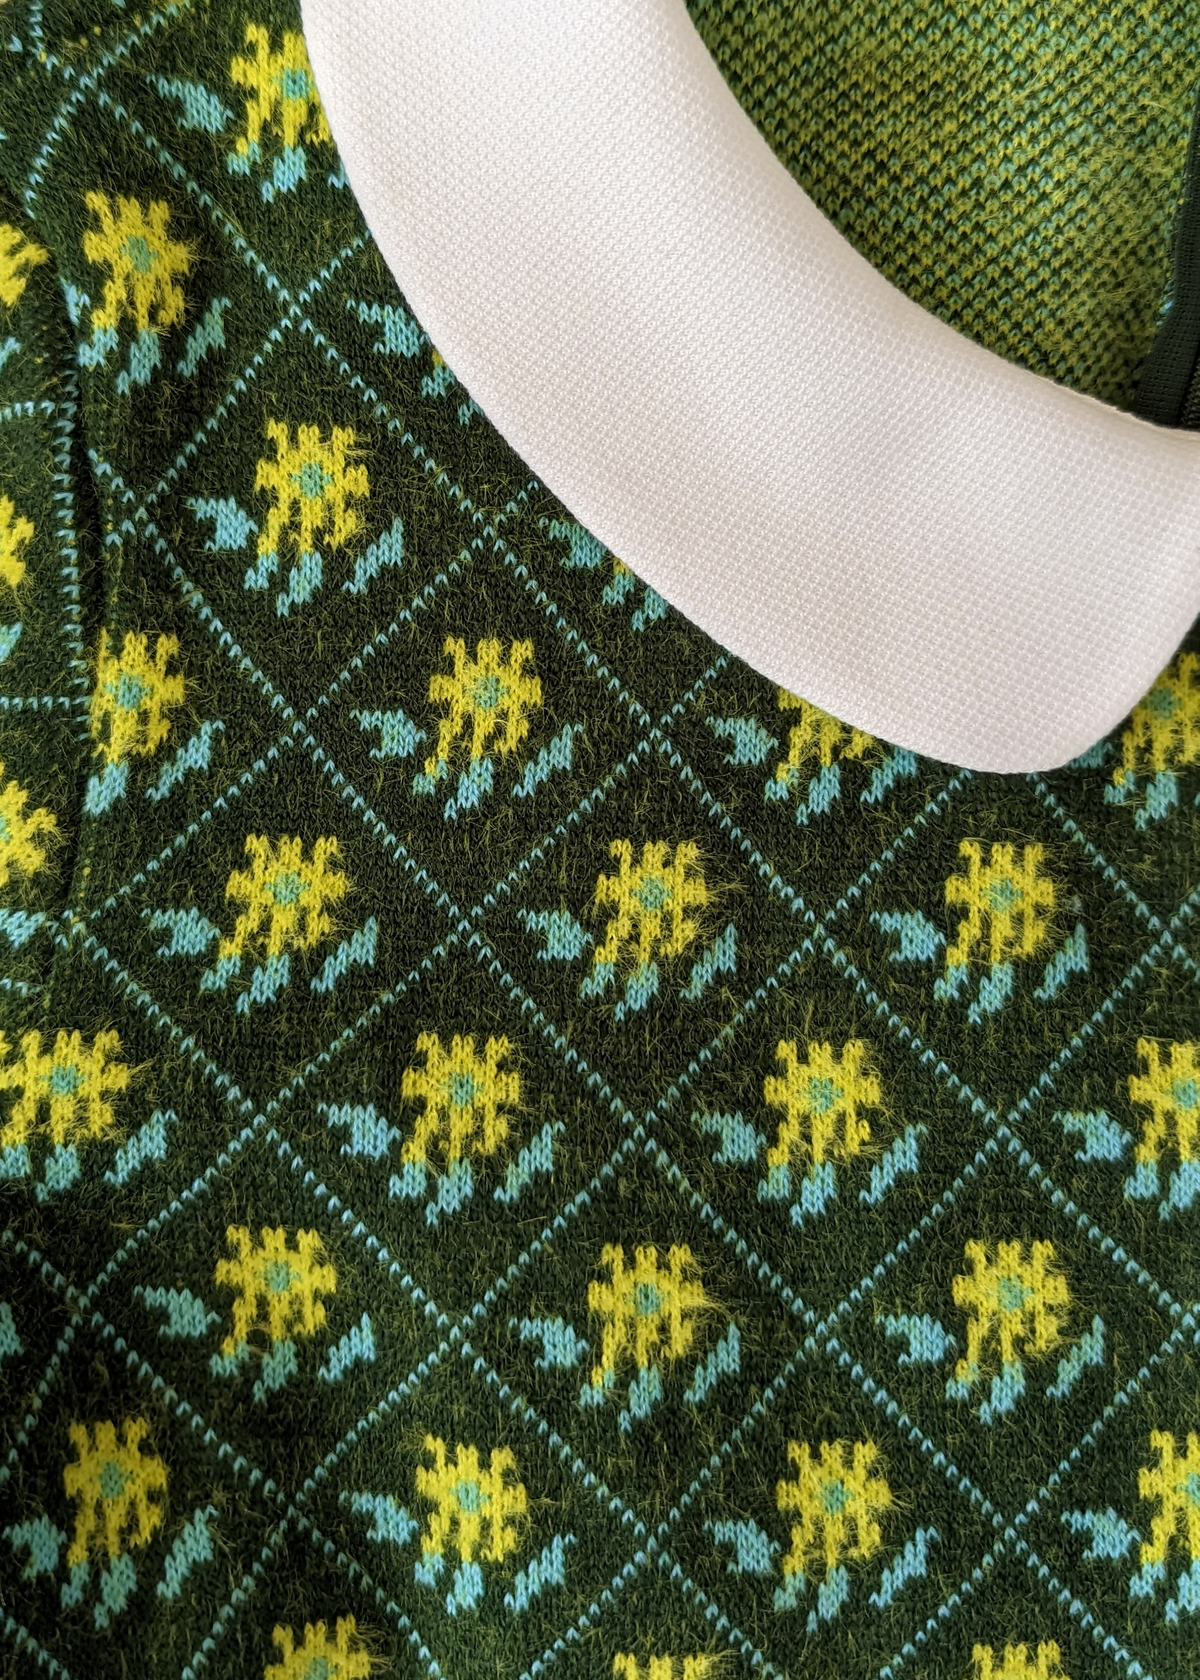 60s inspired peter pan dolly collar knit mini dress in mossy green with floral pattern all over by Glamorous UK